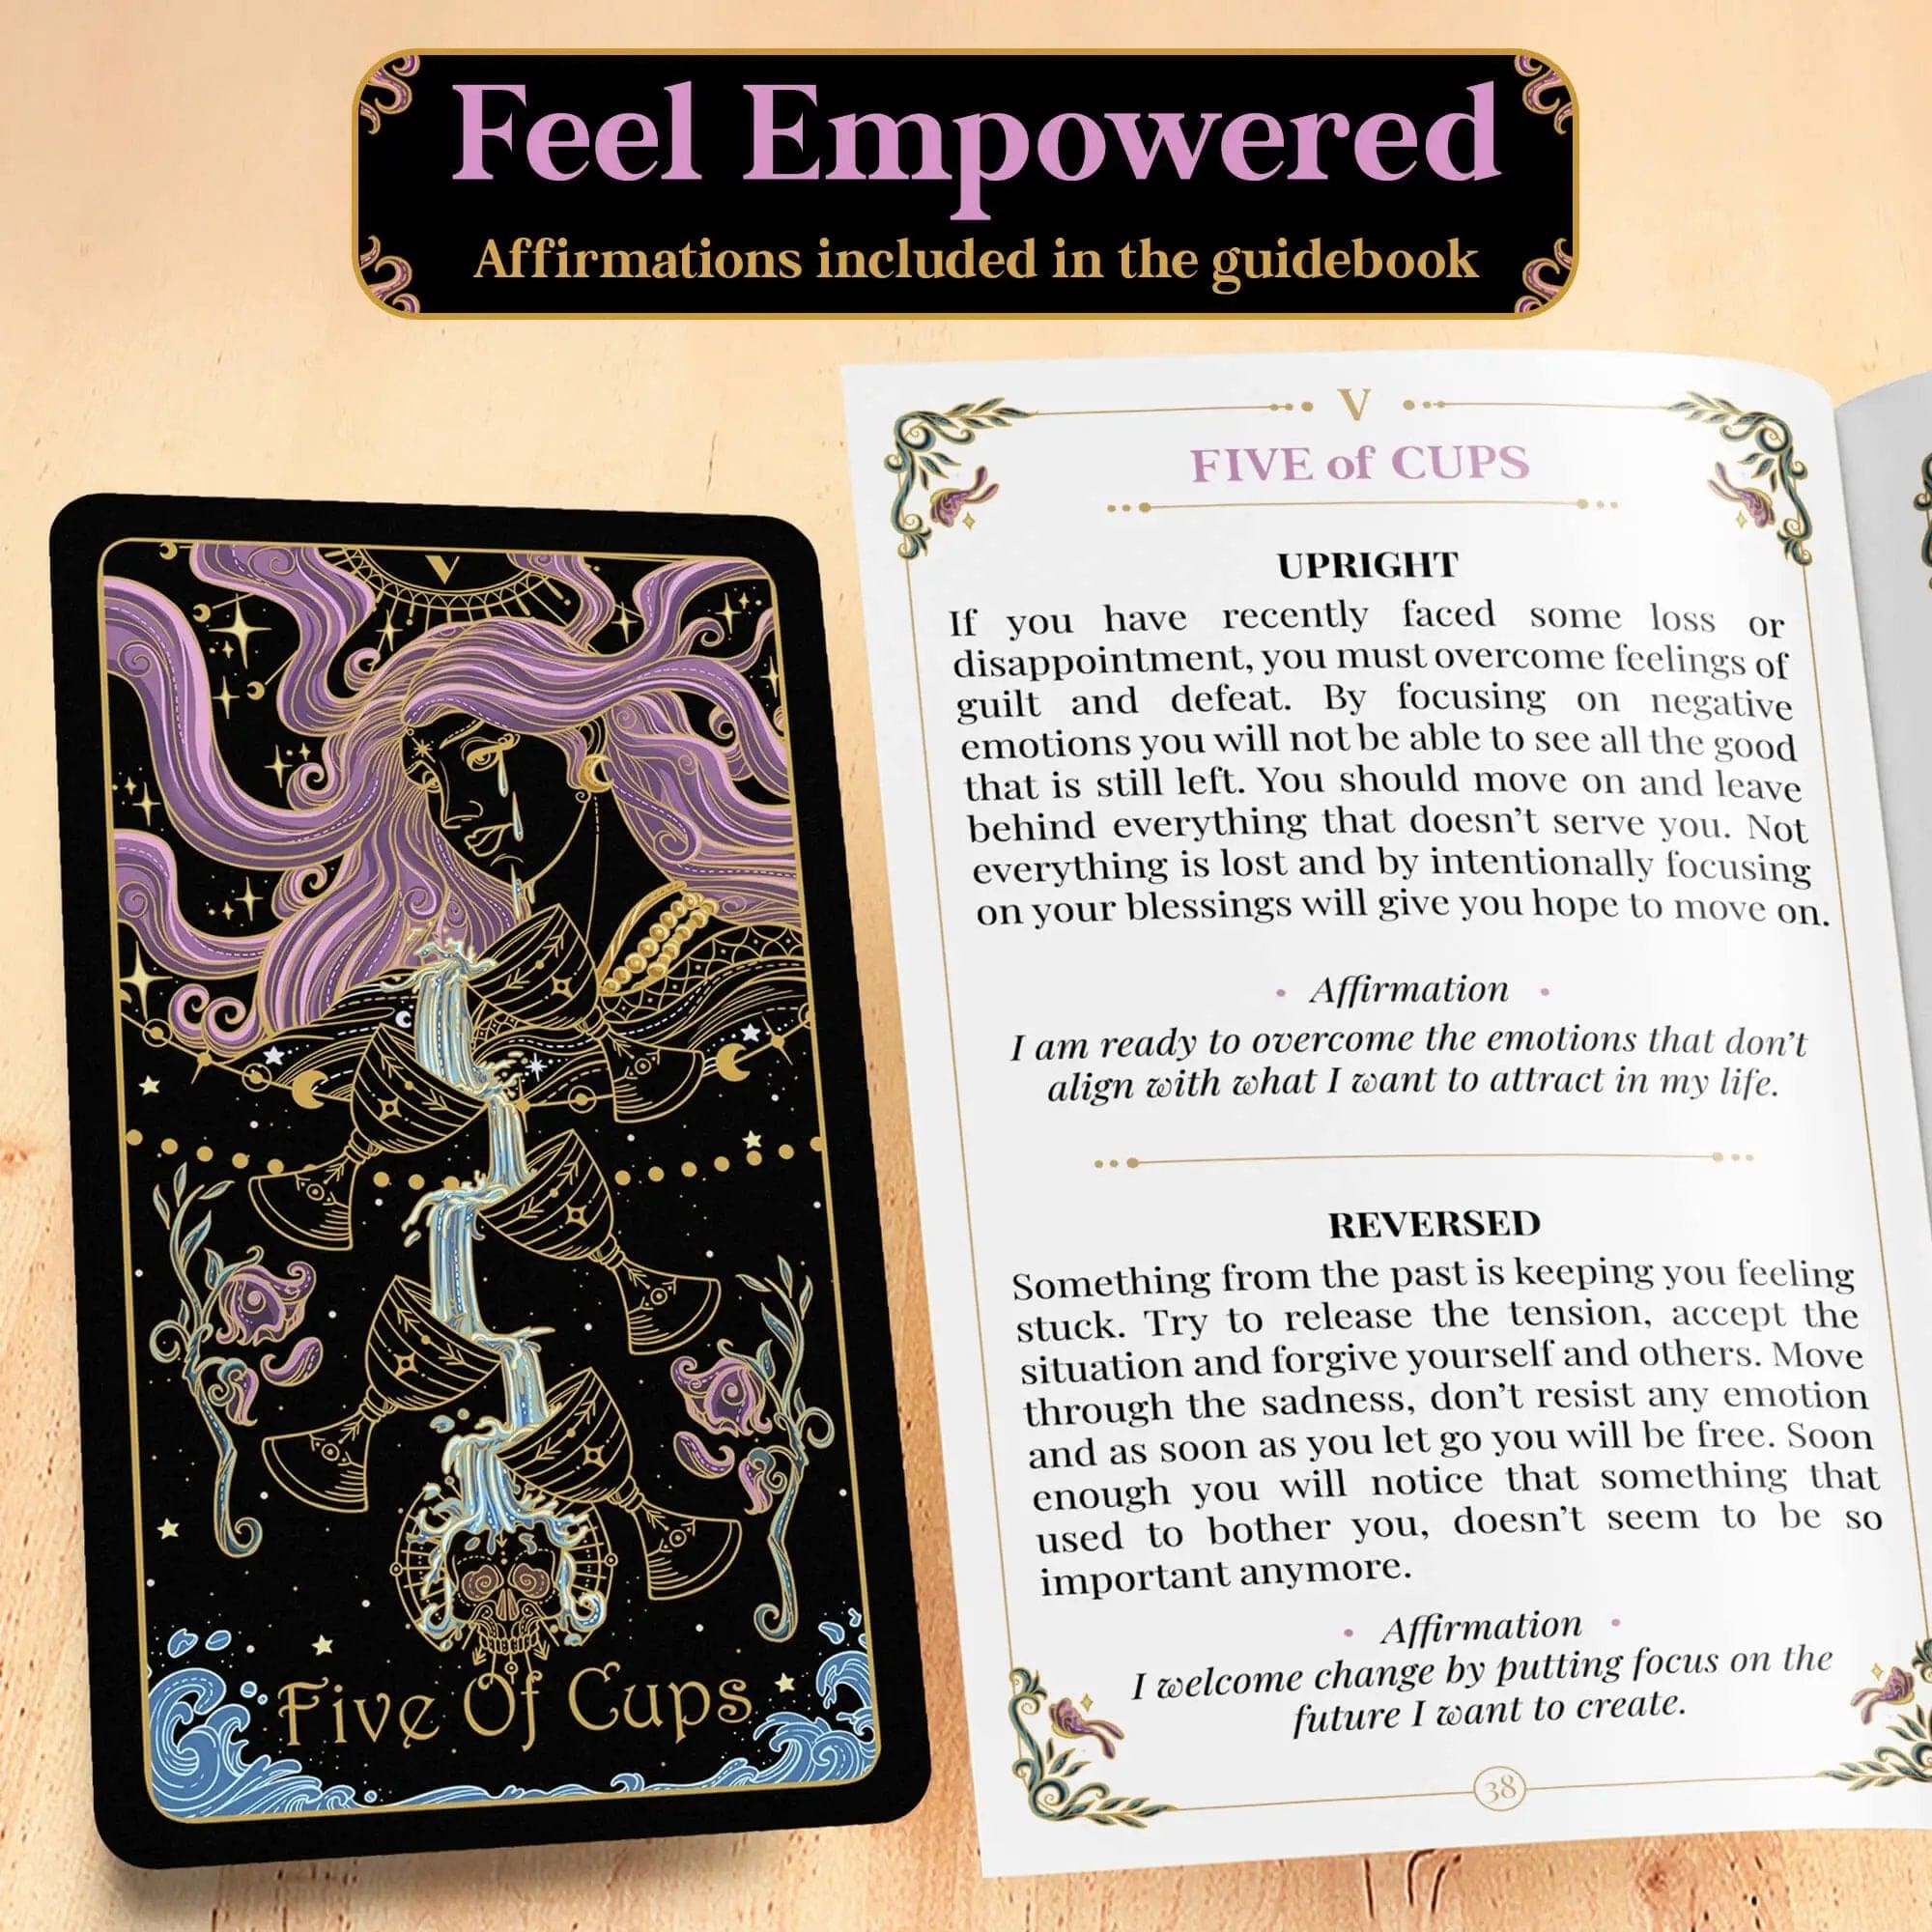 Calmoura Tridevia Golden Foil 78-Card Tarot Deck with Enlightening Affirmations in a Luxury Collector’s Box